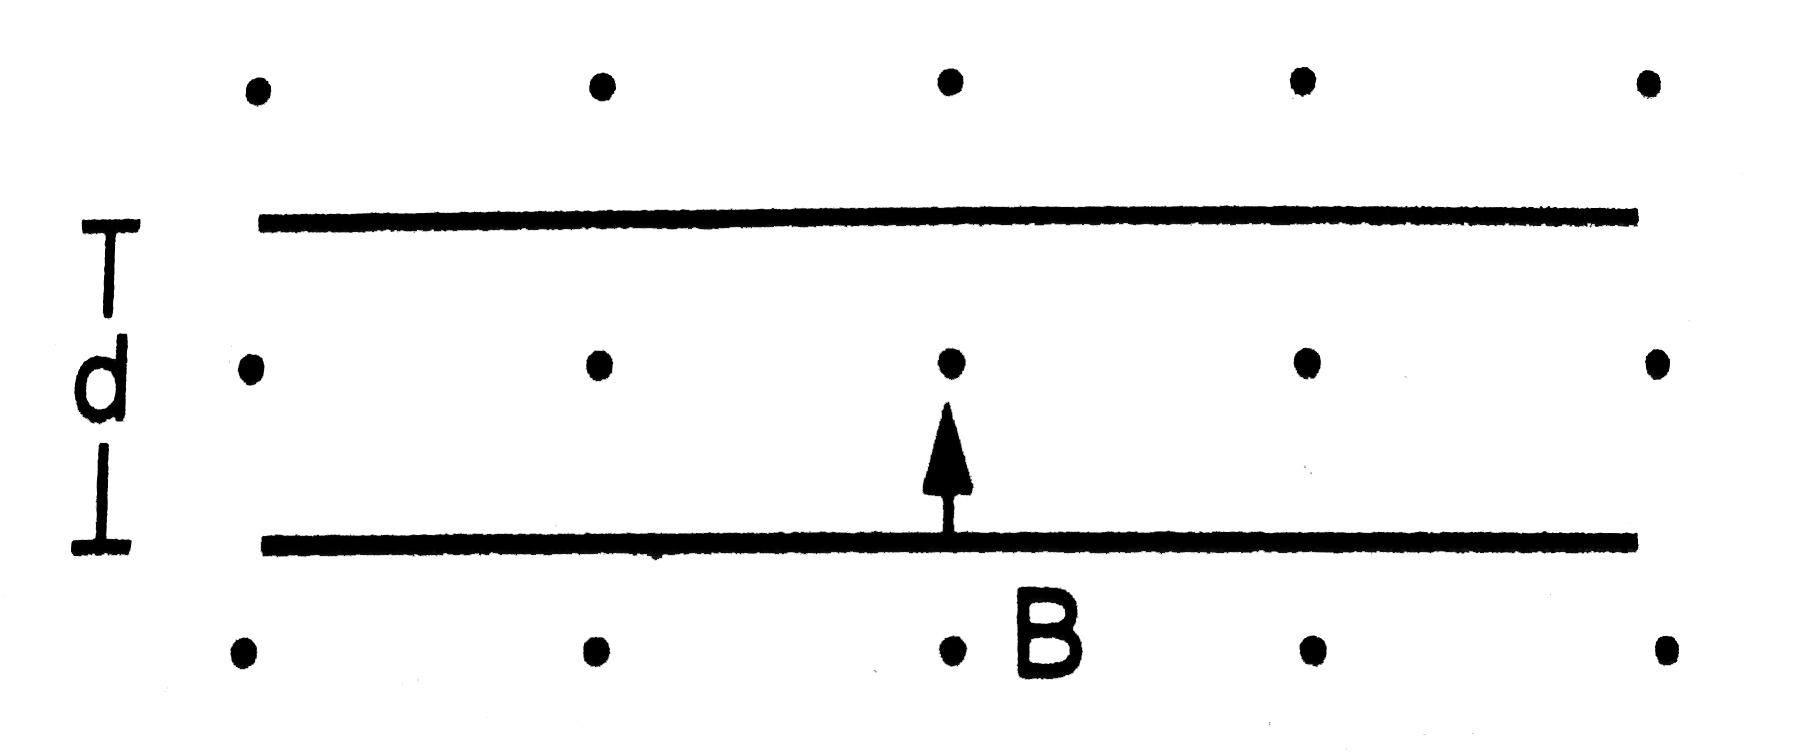 An electron is emitted with negligible speed from th nagative plate of a parallel plate capacitor charged ot a potential difference V. The separtion between the plates is d and a magnetic field B exists in the space as shown  in . Show that the electron will fail to strike the upper plate if   ltdgt ((2me V)/(eB0^2))^(1/2).